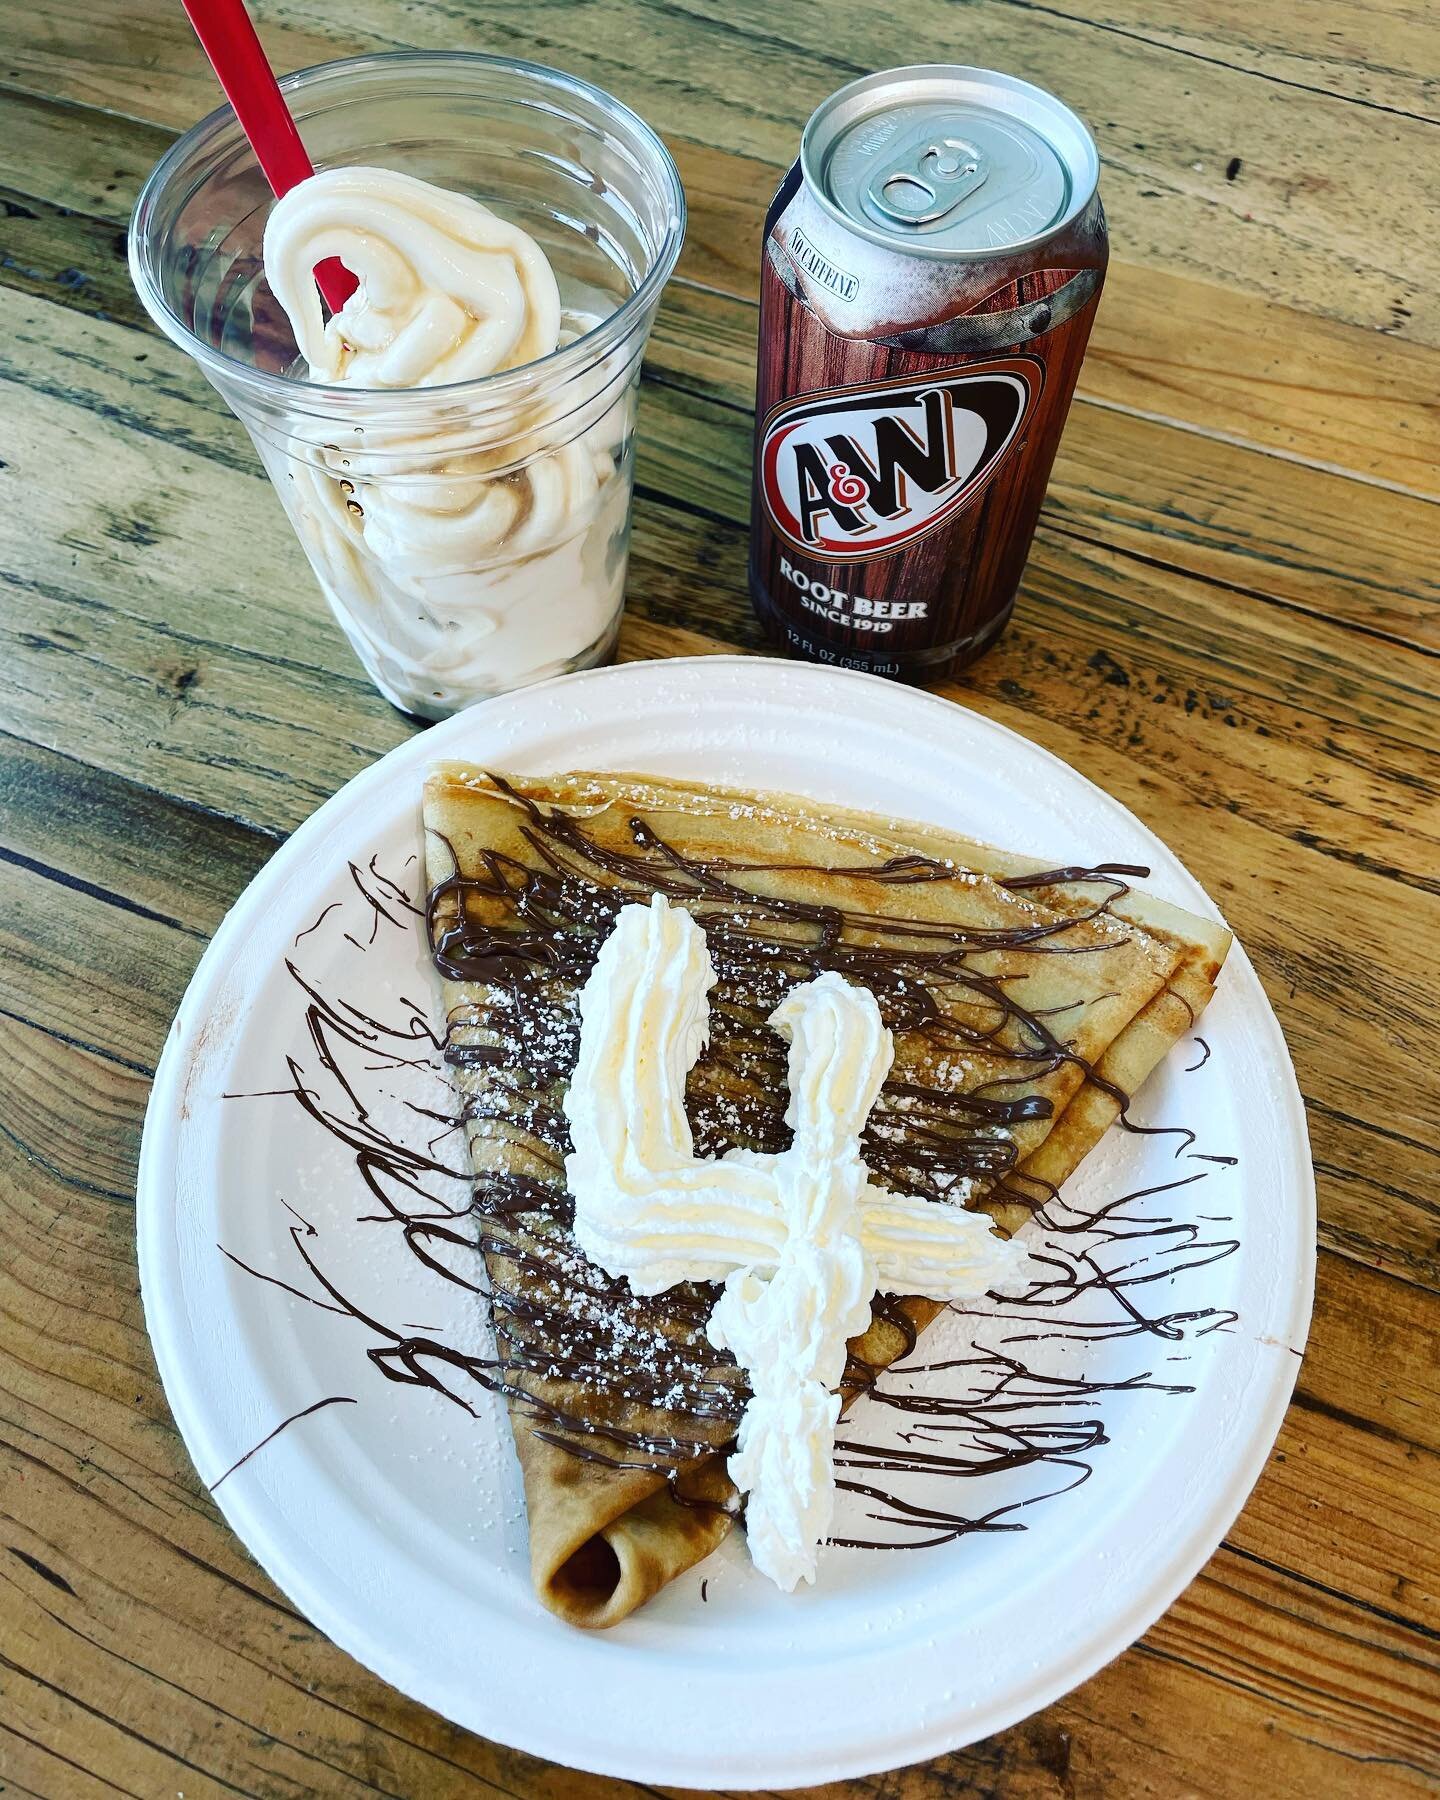 &ldquo;May the $4 Nutella crepe or Root-beer Float be with you&rdquo;. Tomorrow at McBees. #crepes #rootbeerfloat #maythefourthbewithyou #mcbees #pdxfood #supportlocal #pdxicecream #shakes #nutella🍫